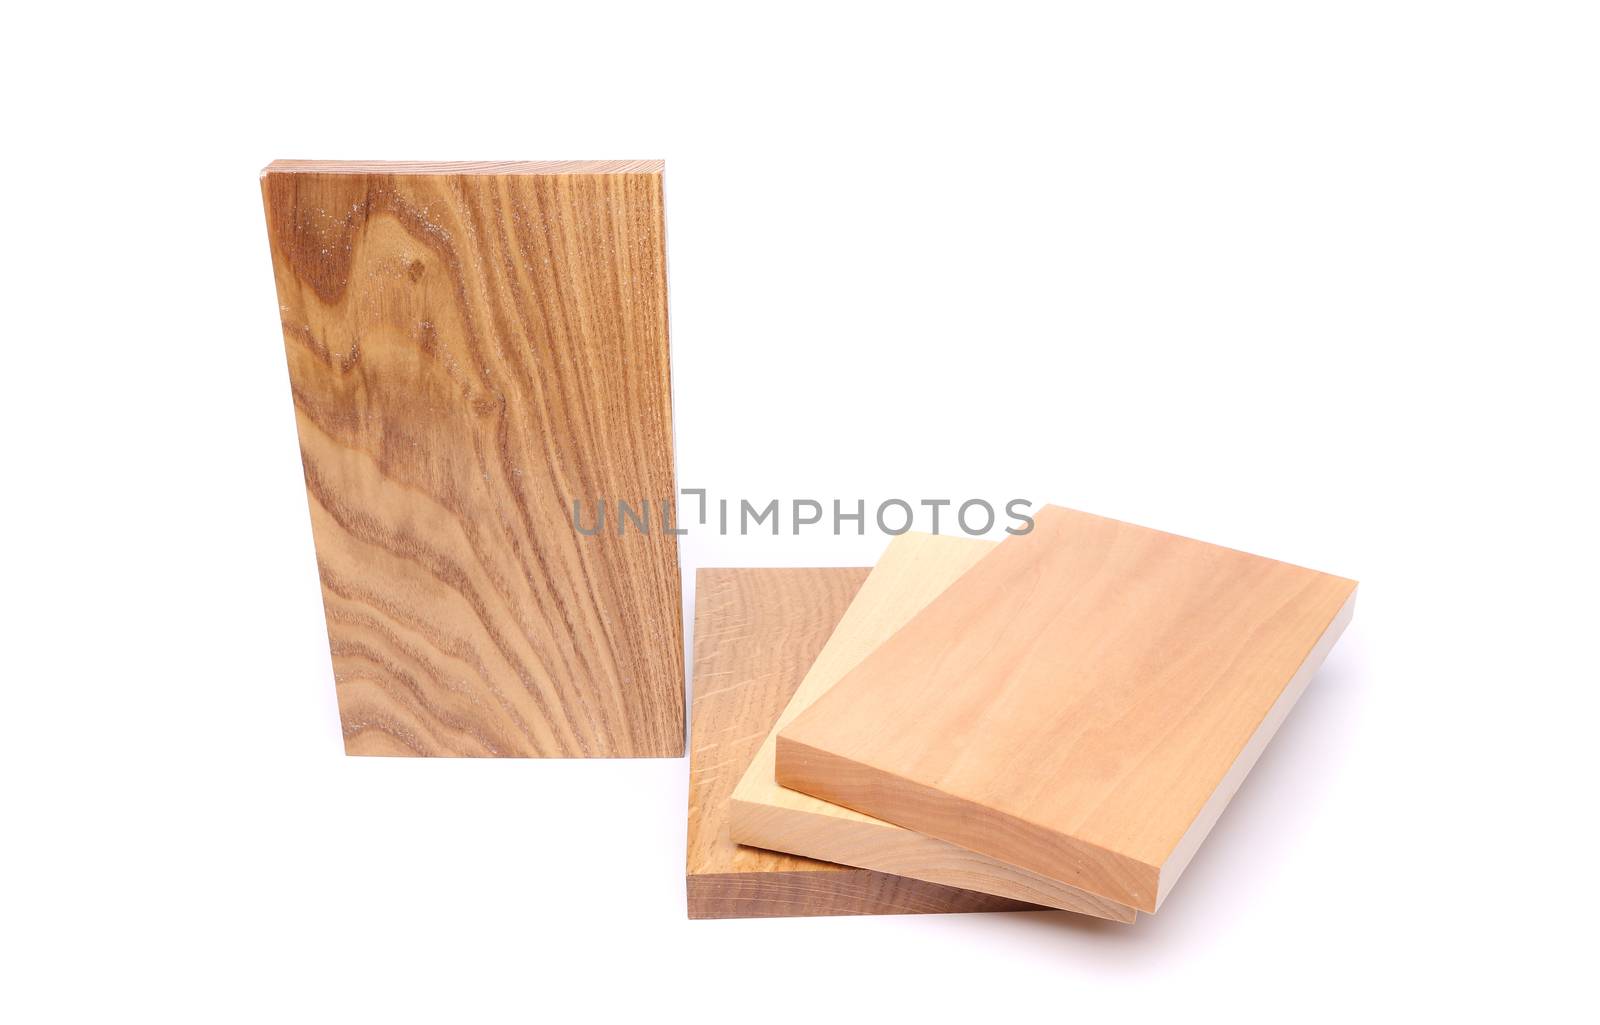 One board (acacia) and three boards (lime, elm, oak) by indigolotos